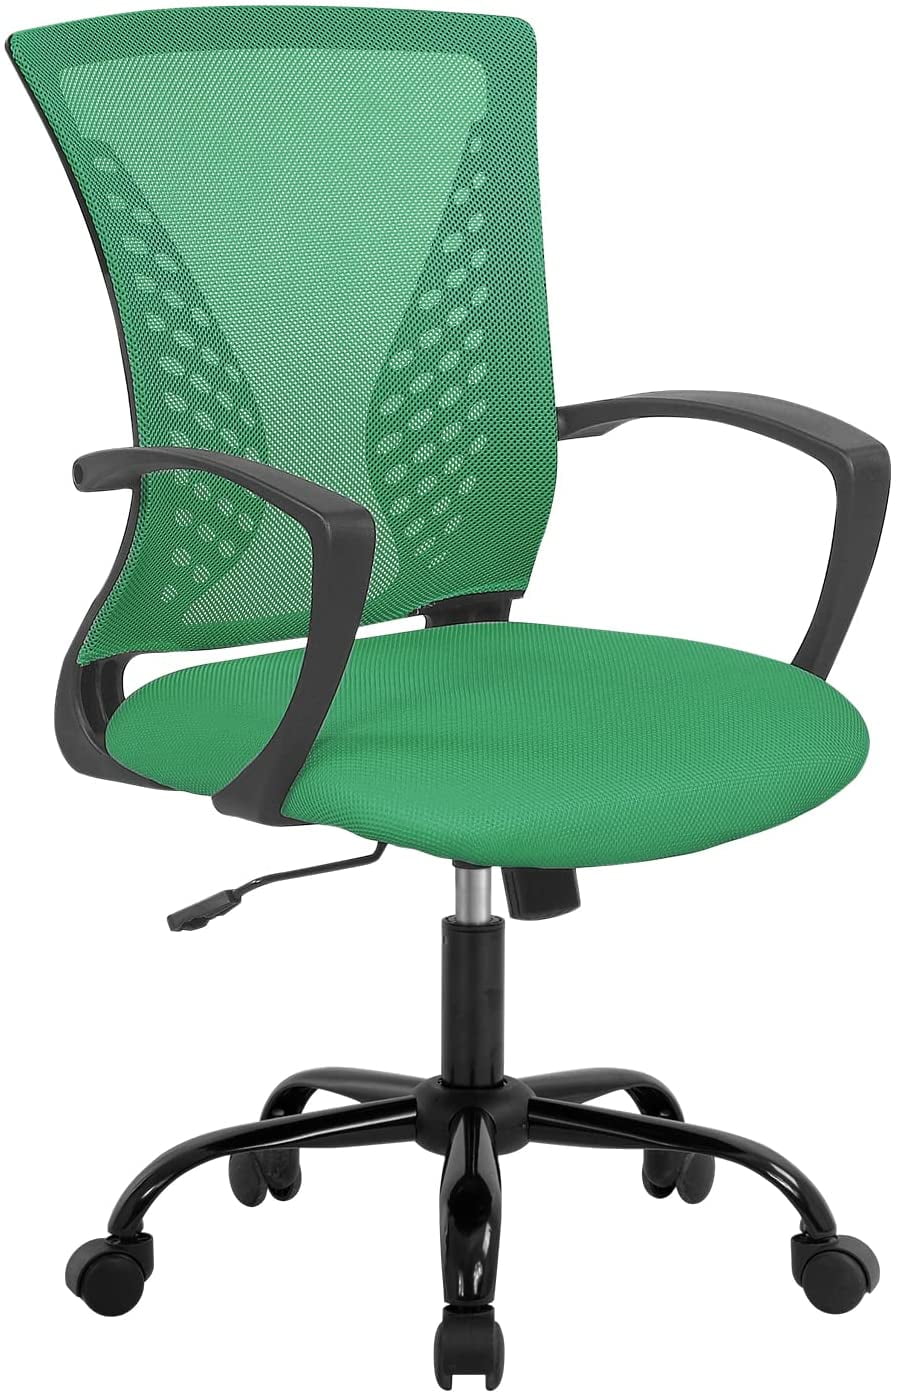 Homcom Retro Mid-back Swivel Fabric Computer Desk Chair Height Adjustable  With Metal Base, Leisure Task Chair On Rolling Wheels For Home Office,  Green : Target